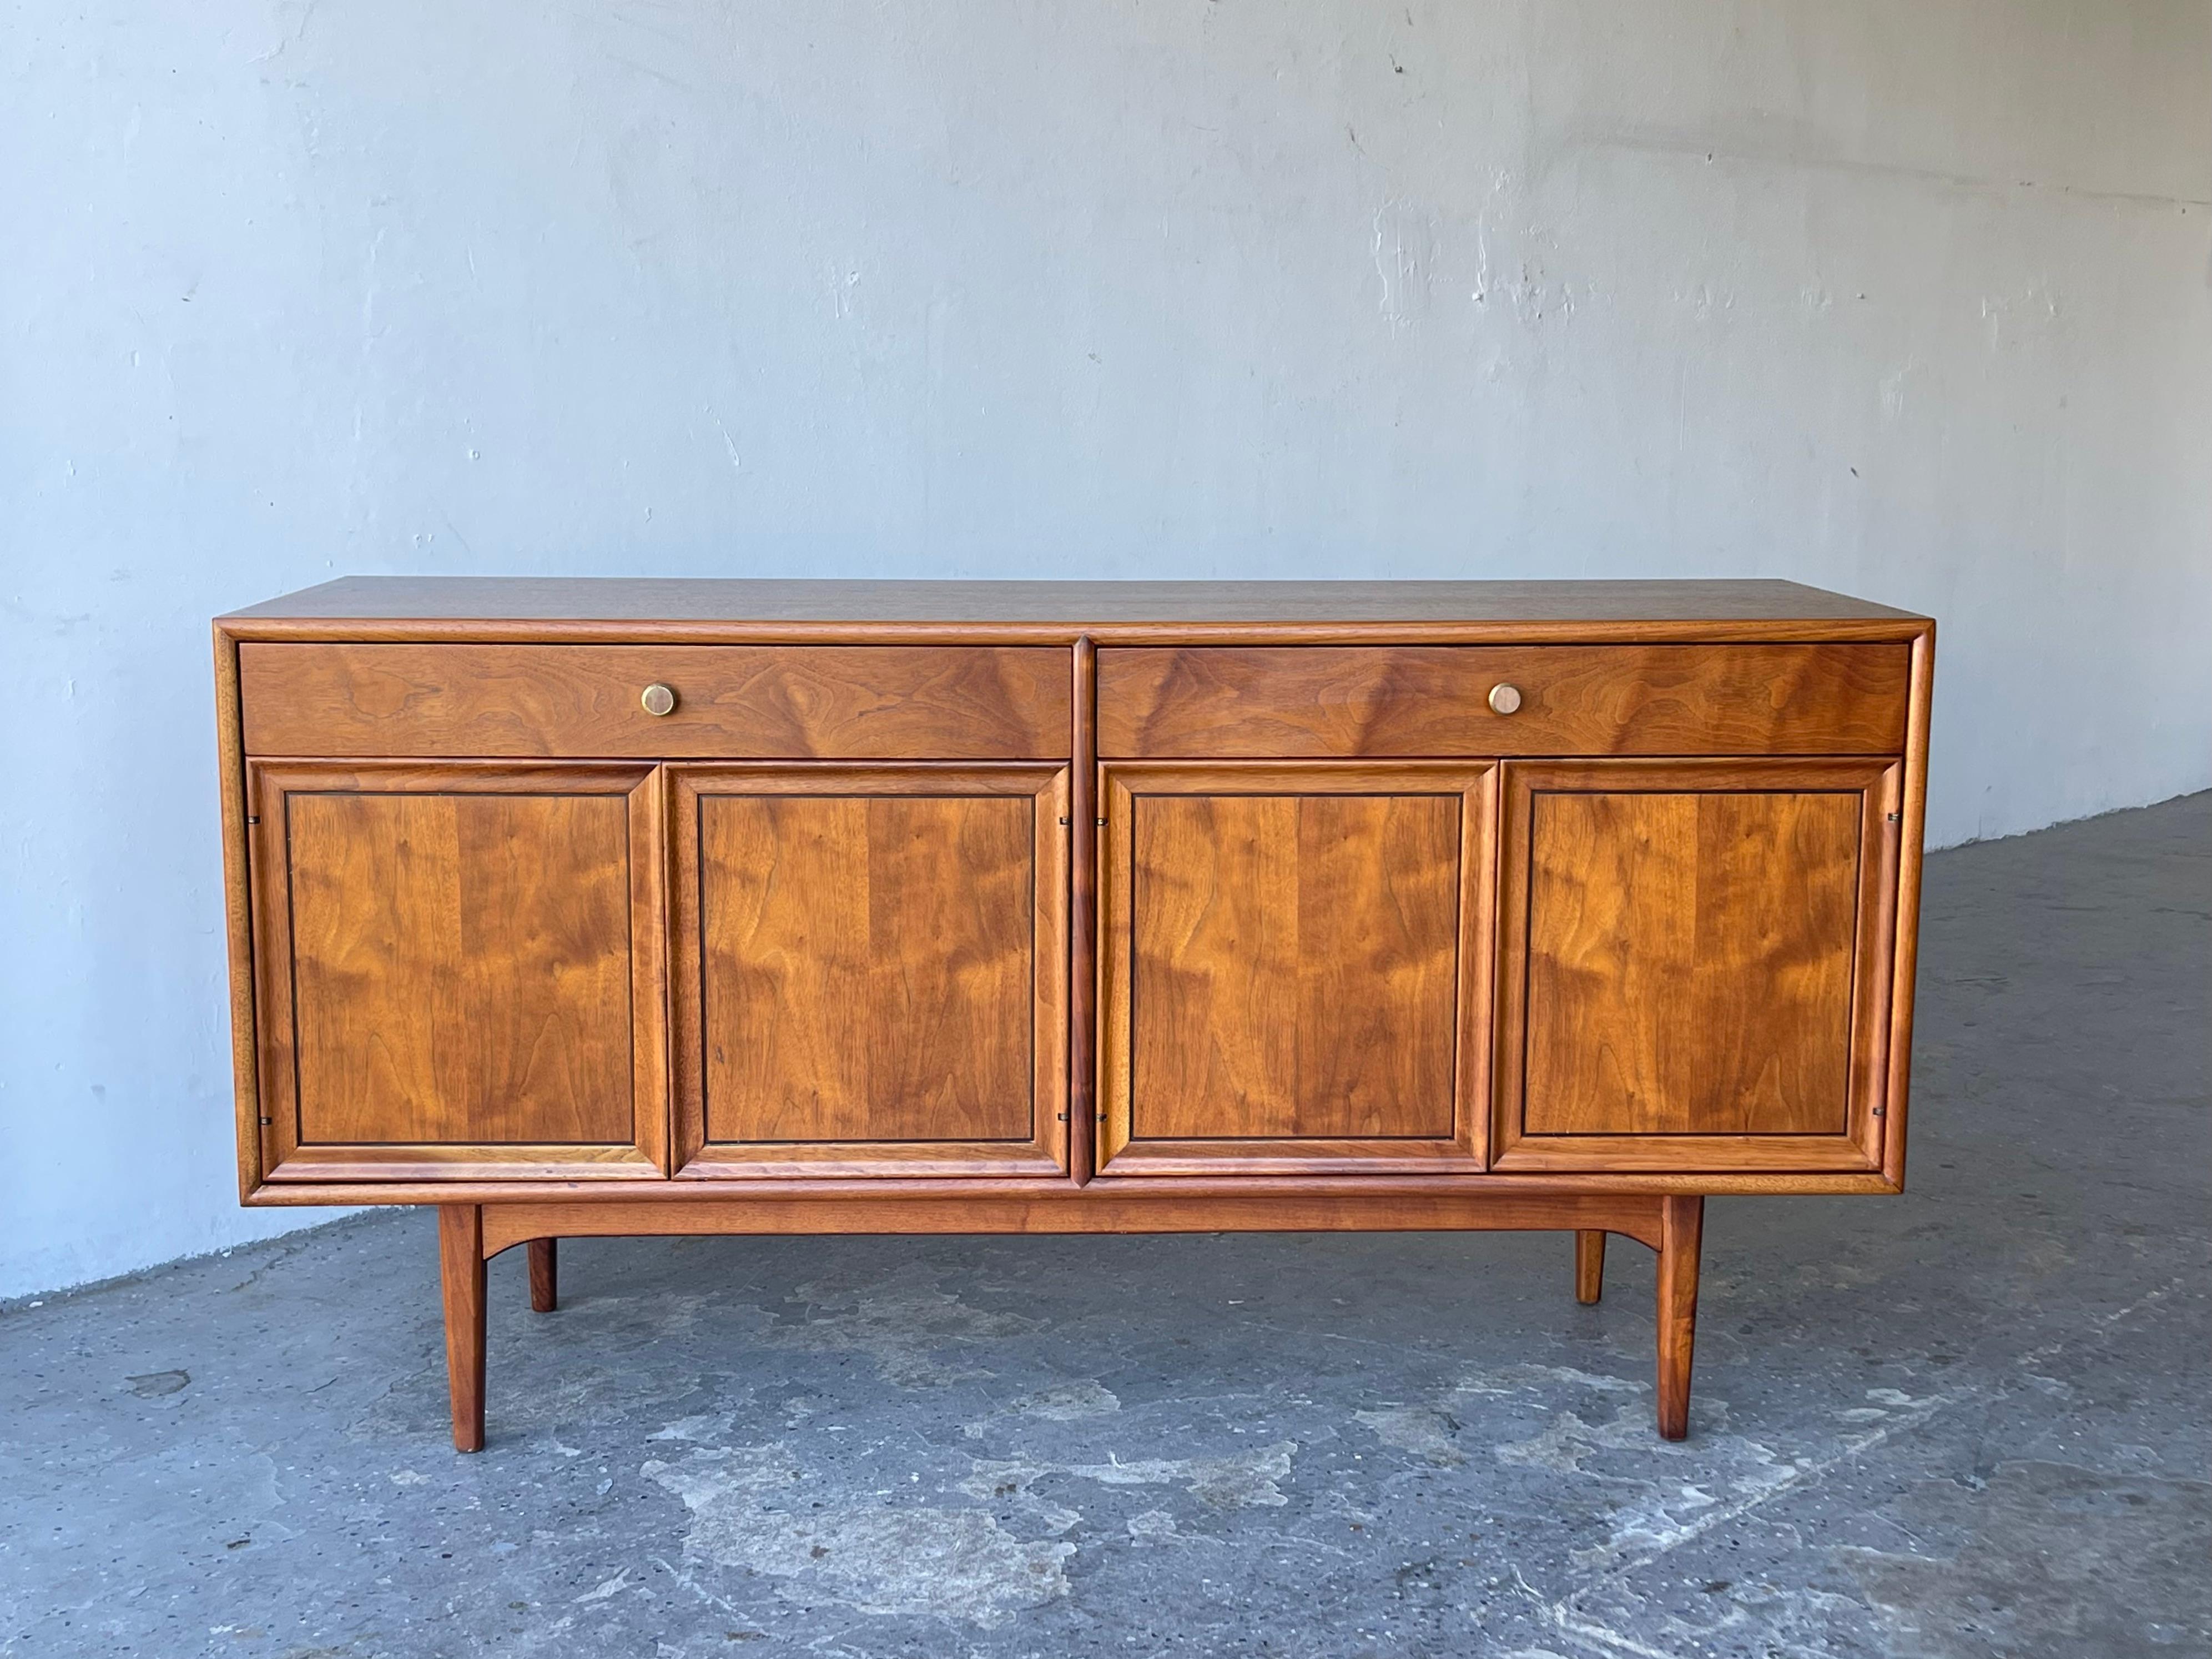 1950s walnut credenza / sideboard designed by Kipp Stewart for Drexel’s “Declaration” line. Composed of two sets of hinged doors which open to reveal a single, removable shelf per side. 


 The left side additionally features two horizontal